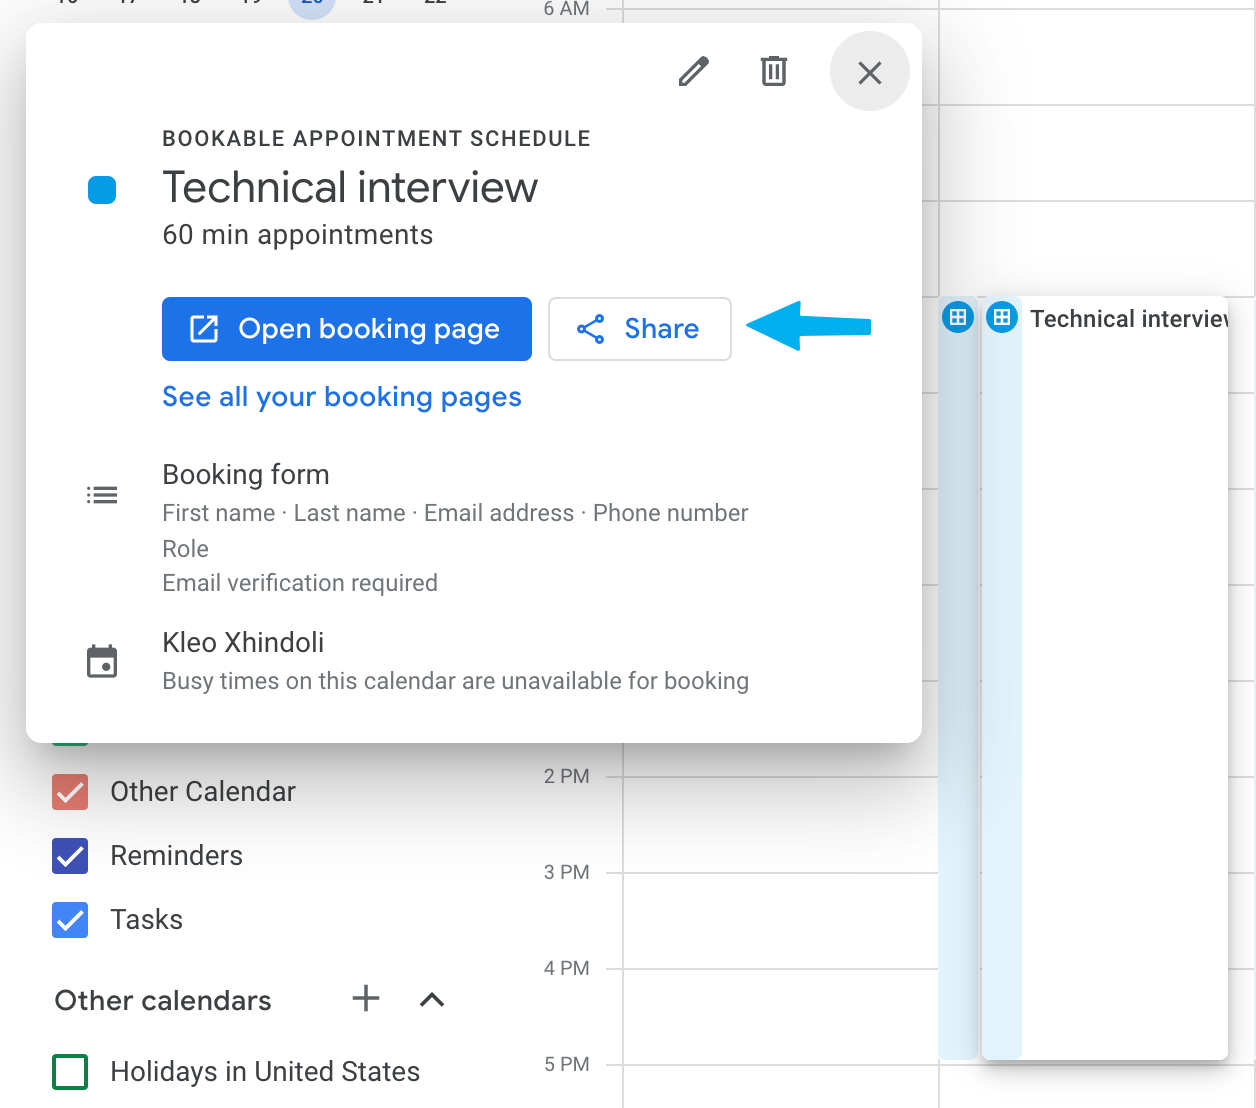 How to Use the Google Calendar Appointment Schedule For Free